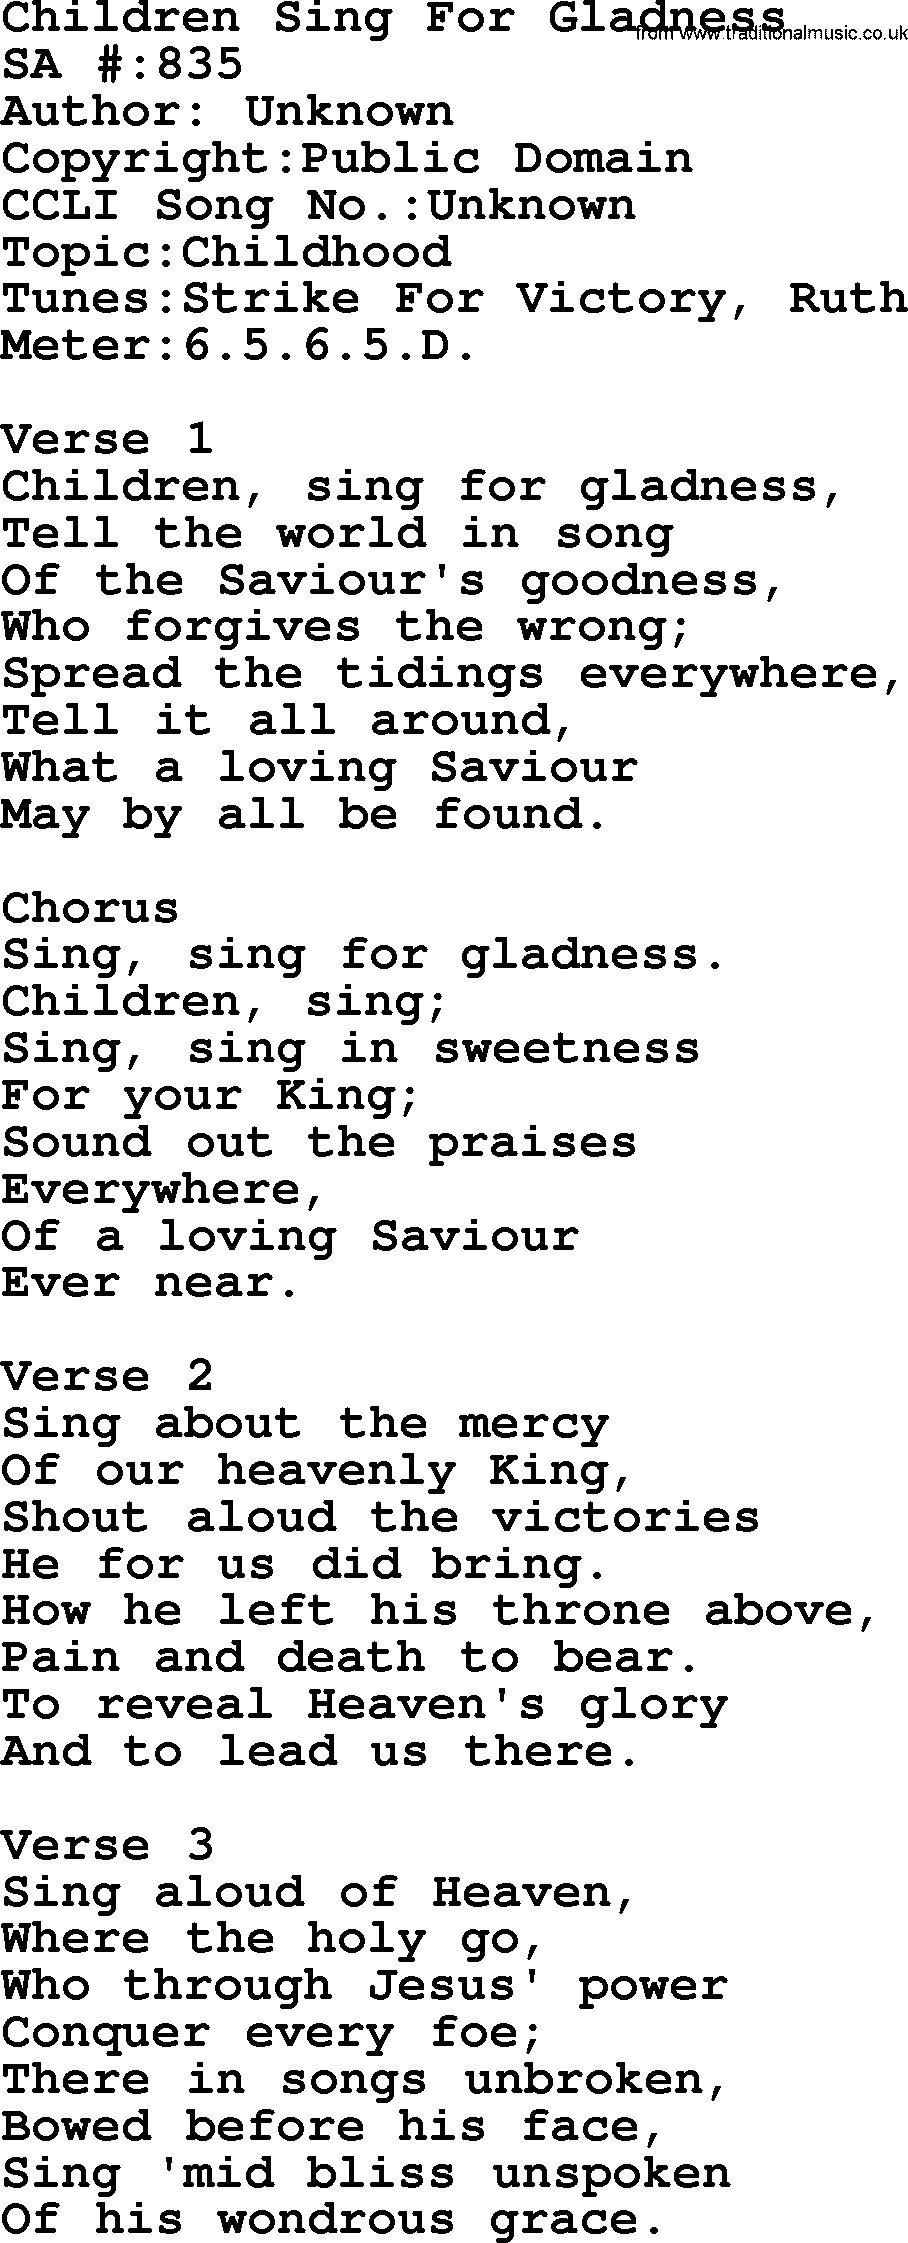 Salvation Army Hymnal, title: Children Sing For Gladness, with lyrics and PDF,